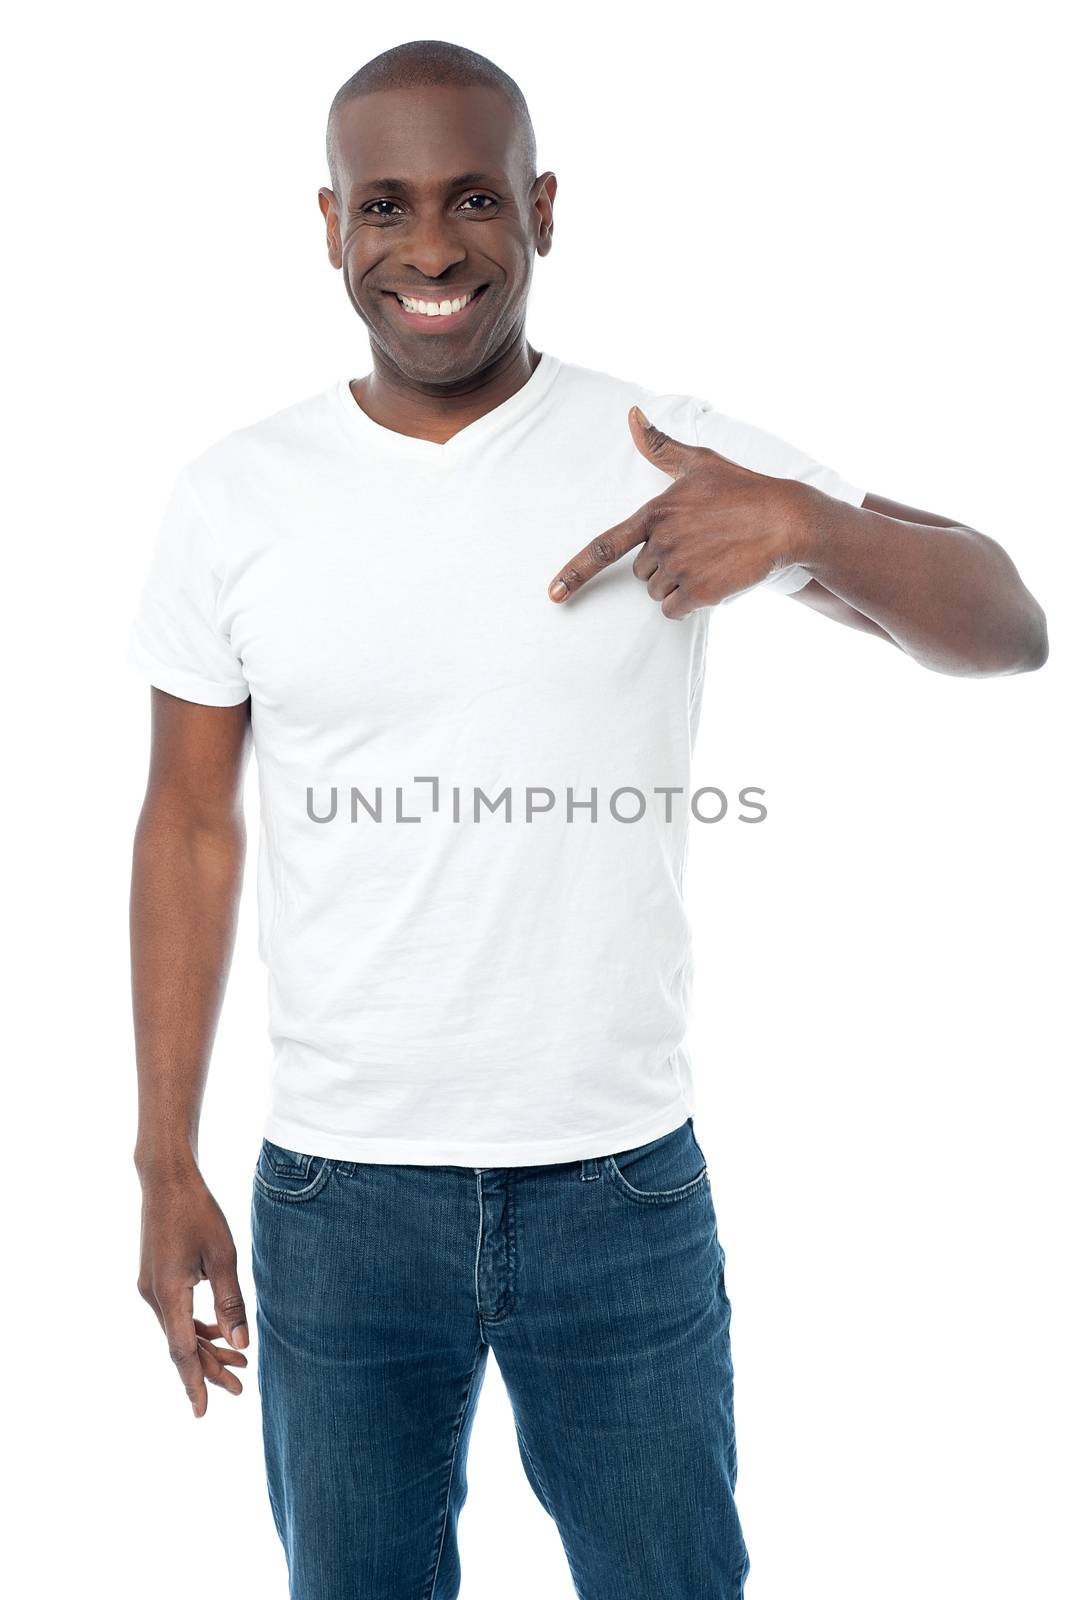 Middle aged man pointing his fingers on a blank t-shirt